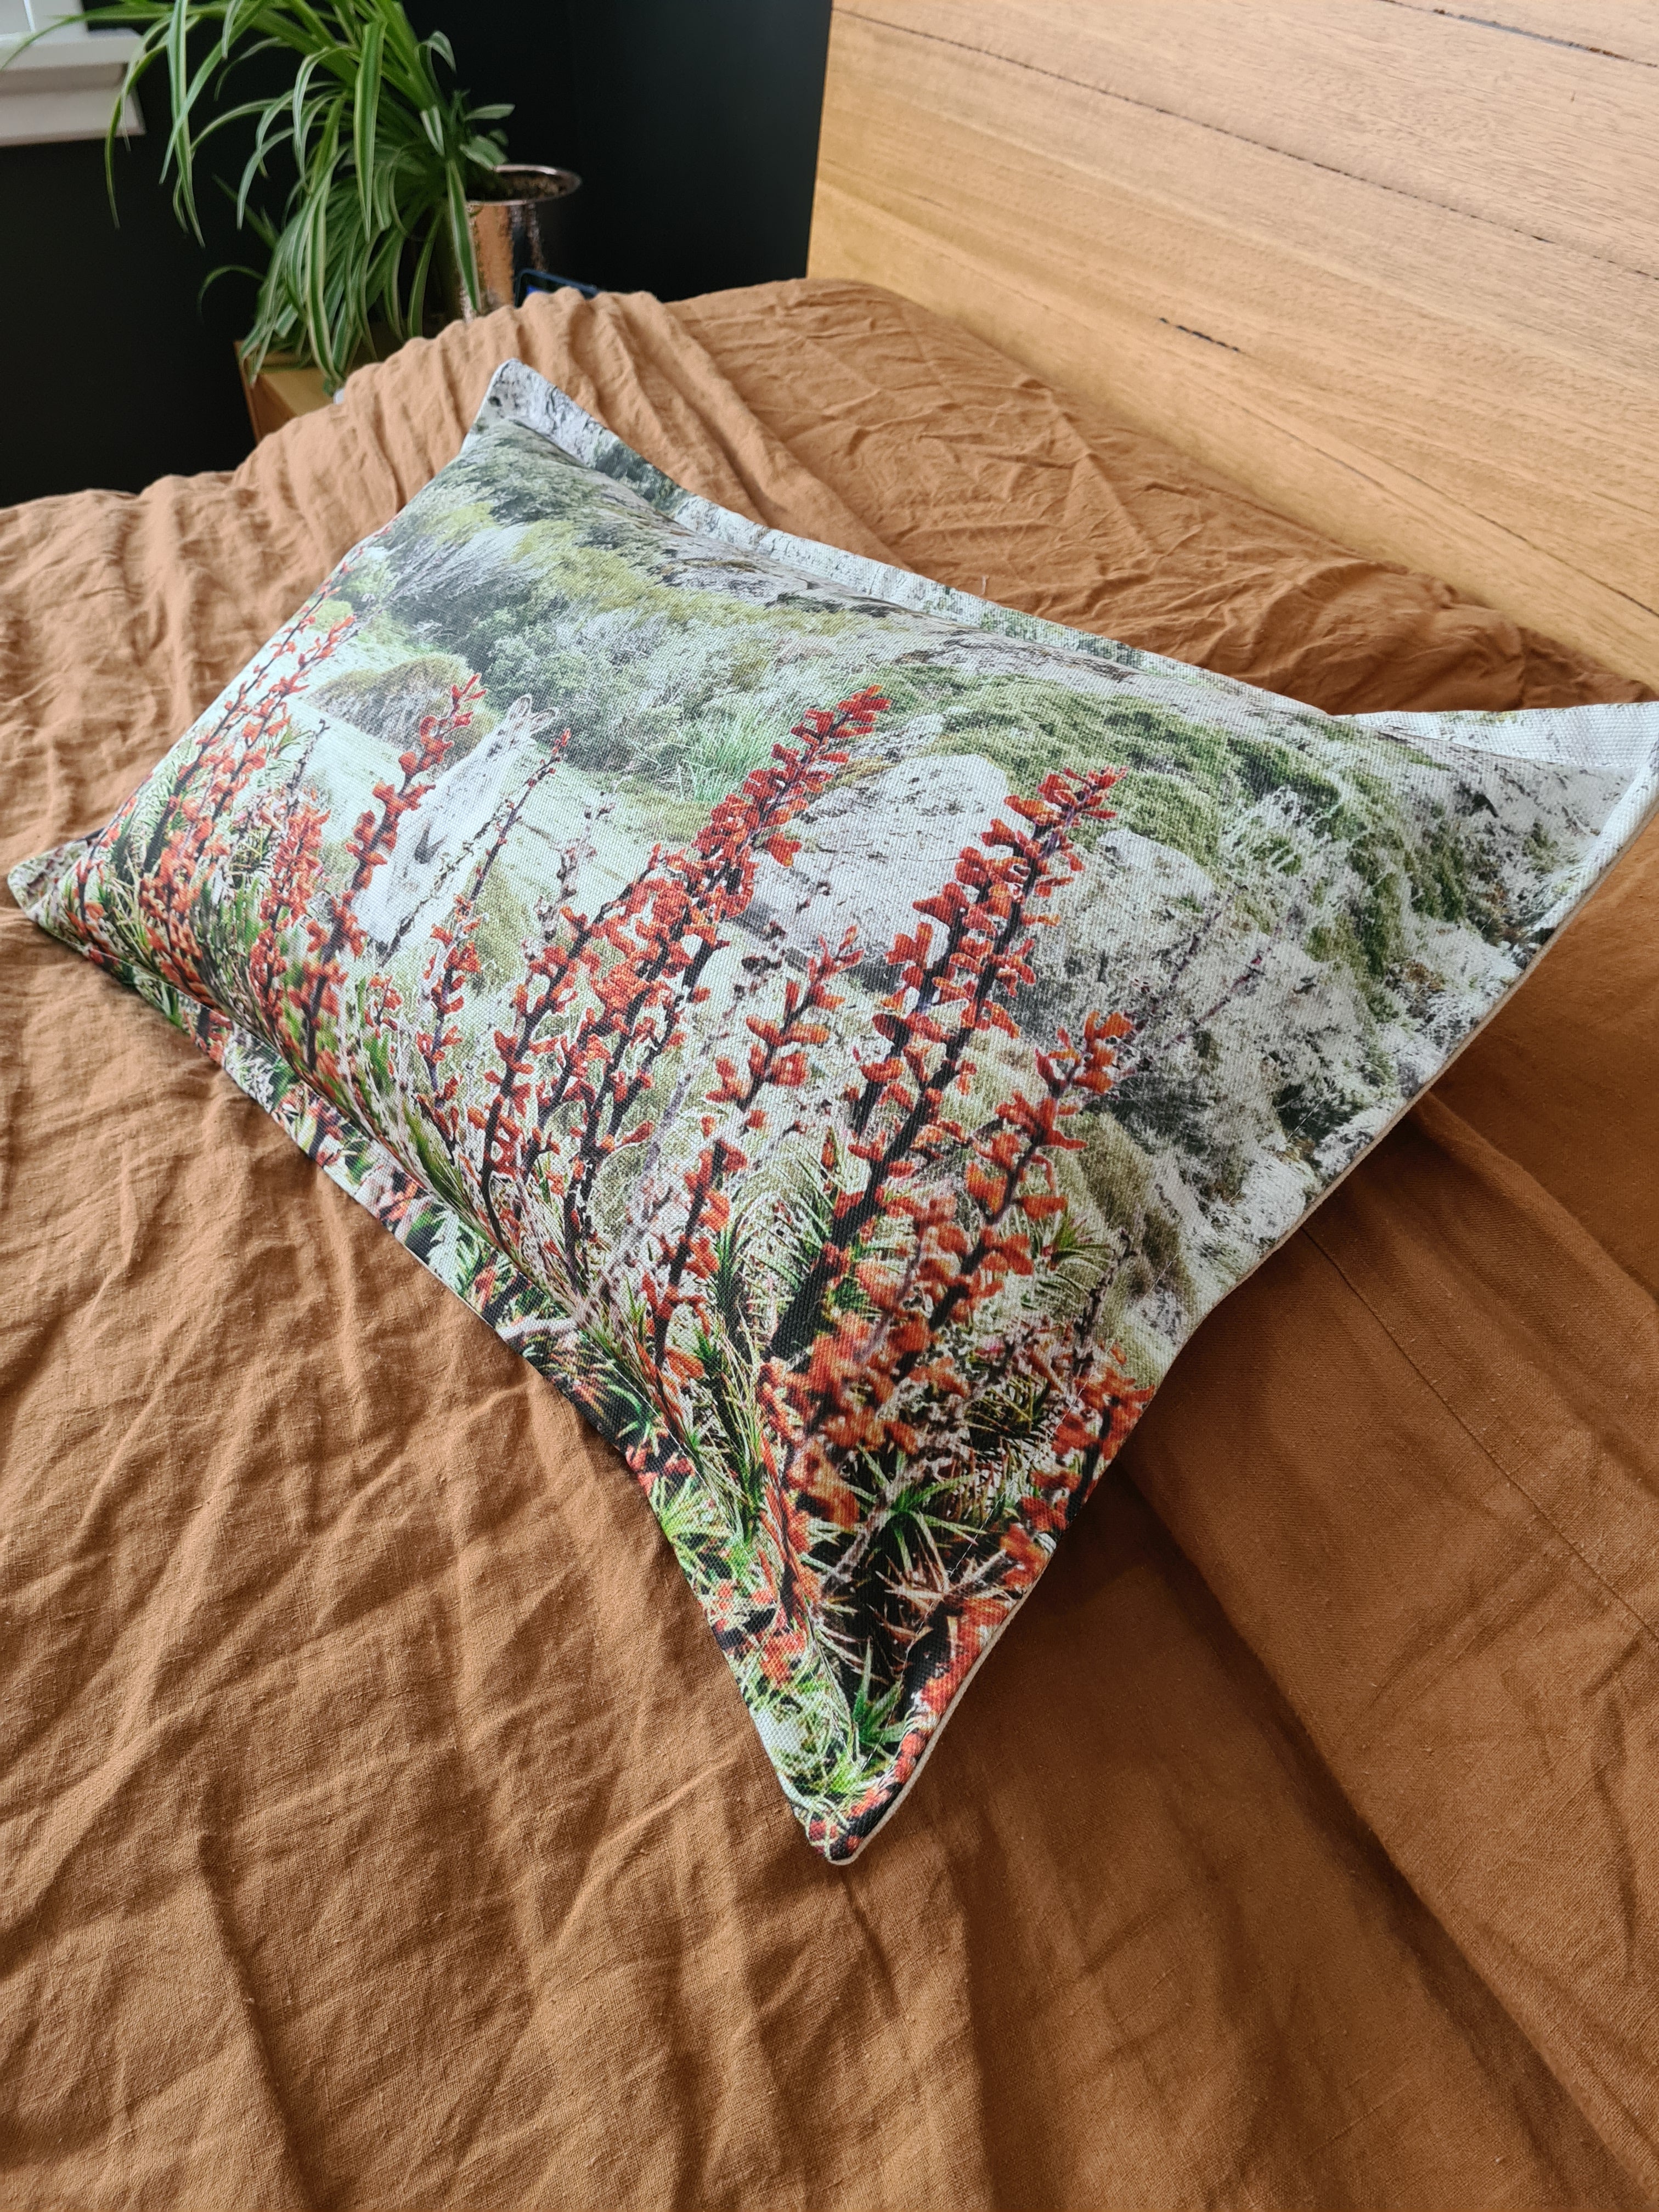 Printed Canvas Cushion - Bennetts Wallaby Cushions The Spotted Quoll 